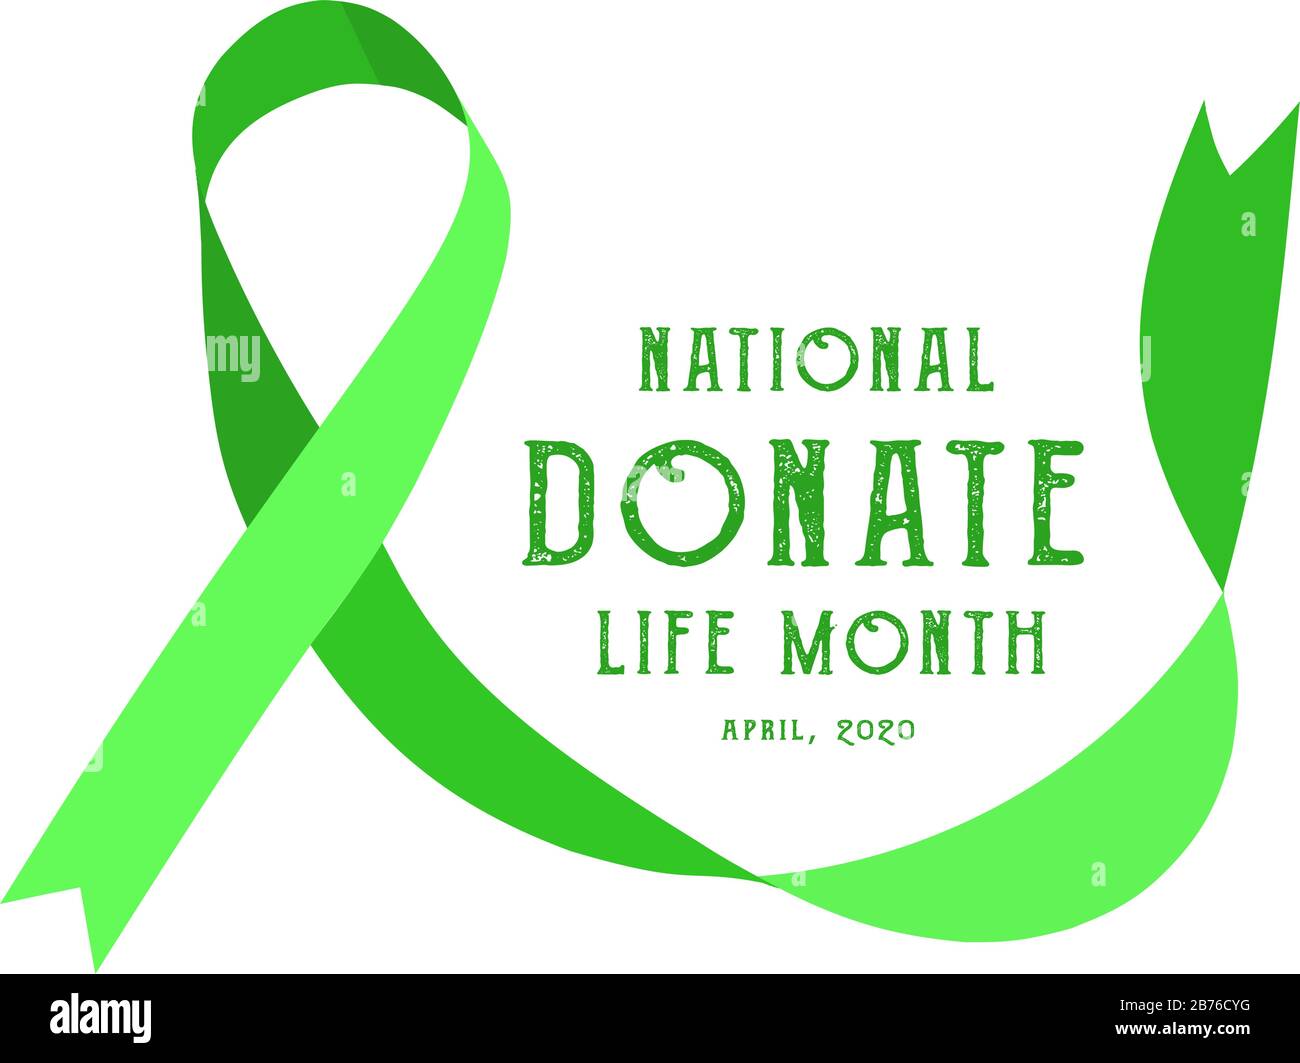 National donate life month. Vector illustration with green ribbon on light Stock Vector